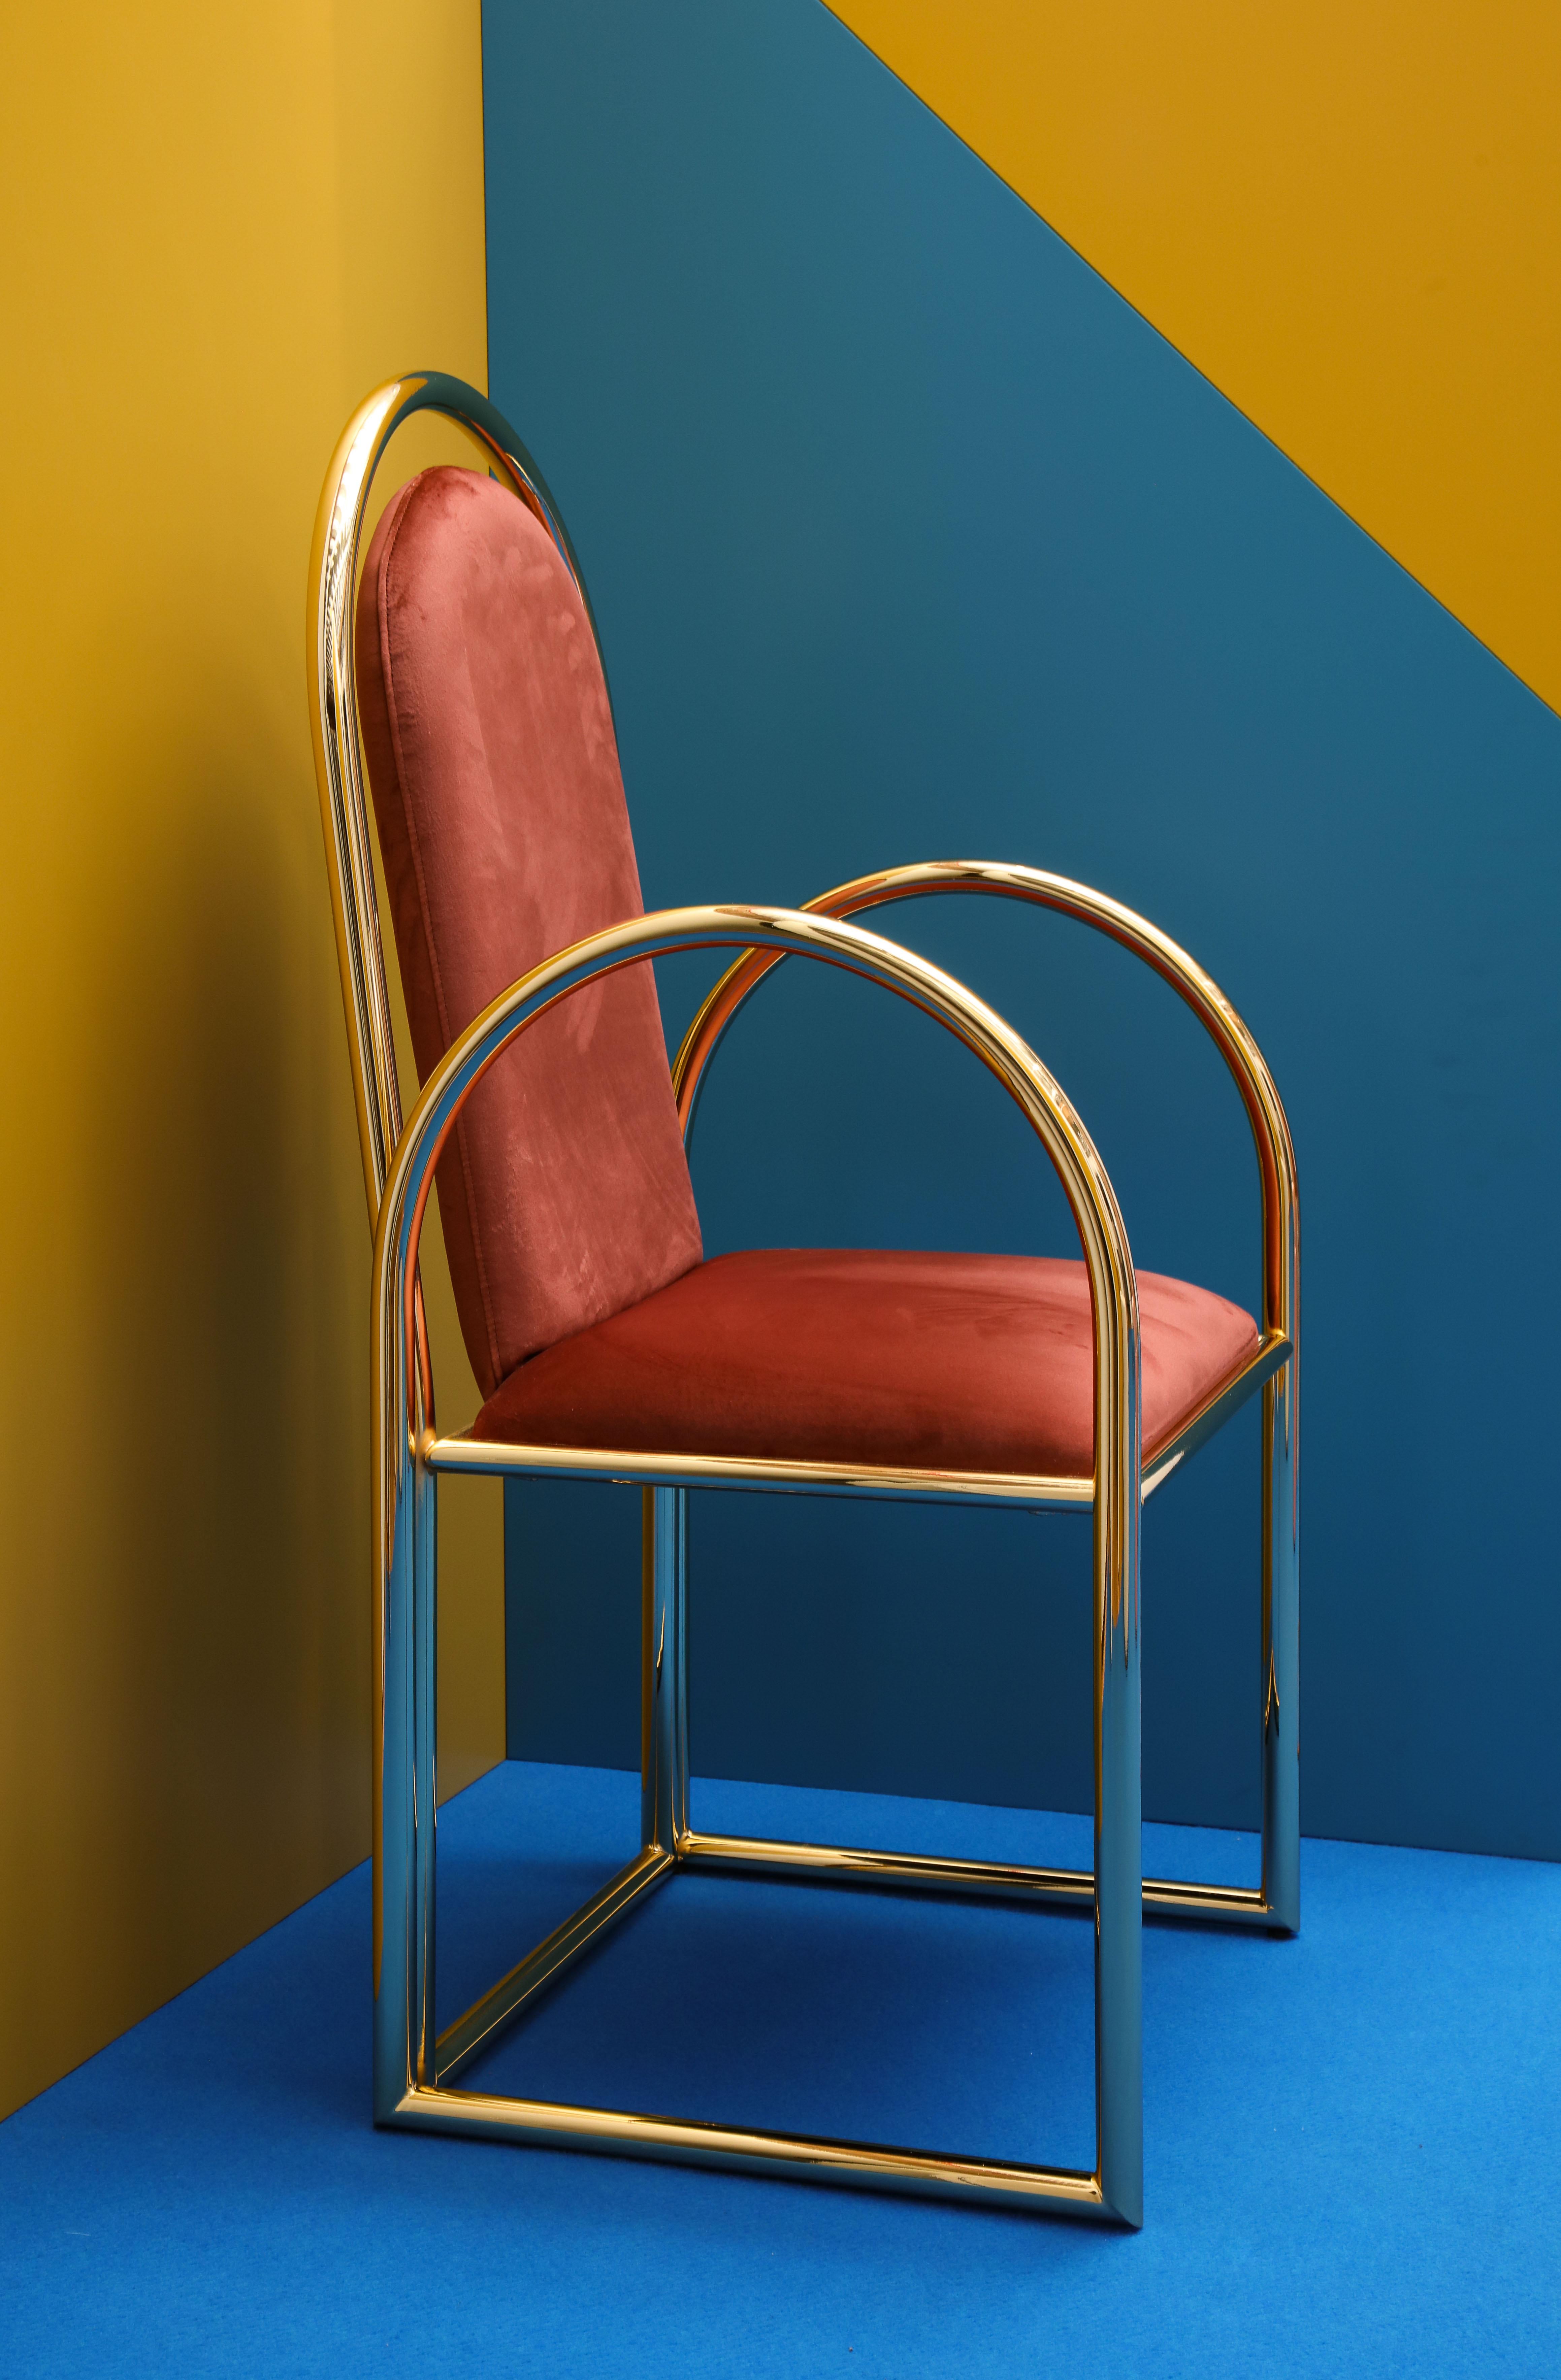 Arco:

Metallic tube structure of 2.5 cm bathed in 24-carat gold.

Seat and backrest with MDF board padded with HR foam of 25 Kg.

Upholstery velvet 100% polyester with backing. 345 gr/m^2. 45000 Martindale cycles

Dimensions: 47 x 45 x 100